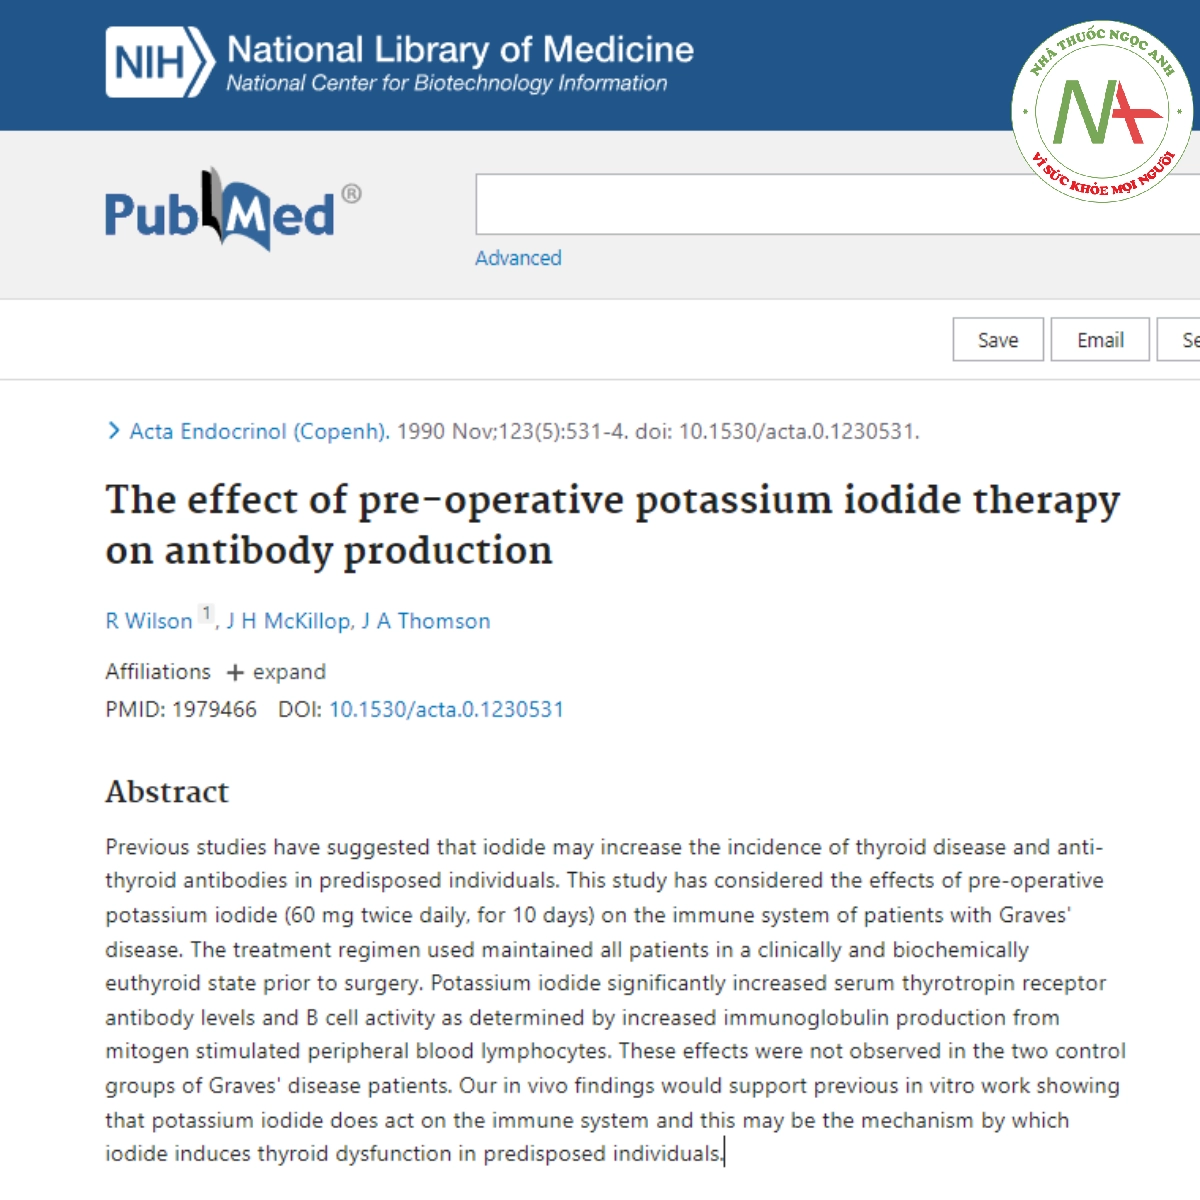 The effect of pre-operative potassium iodide therapy on antibody production